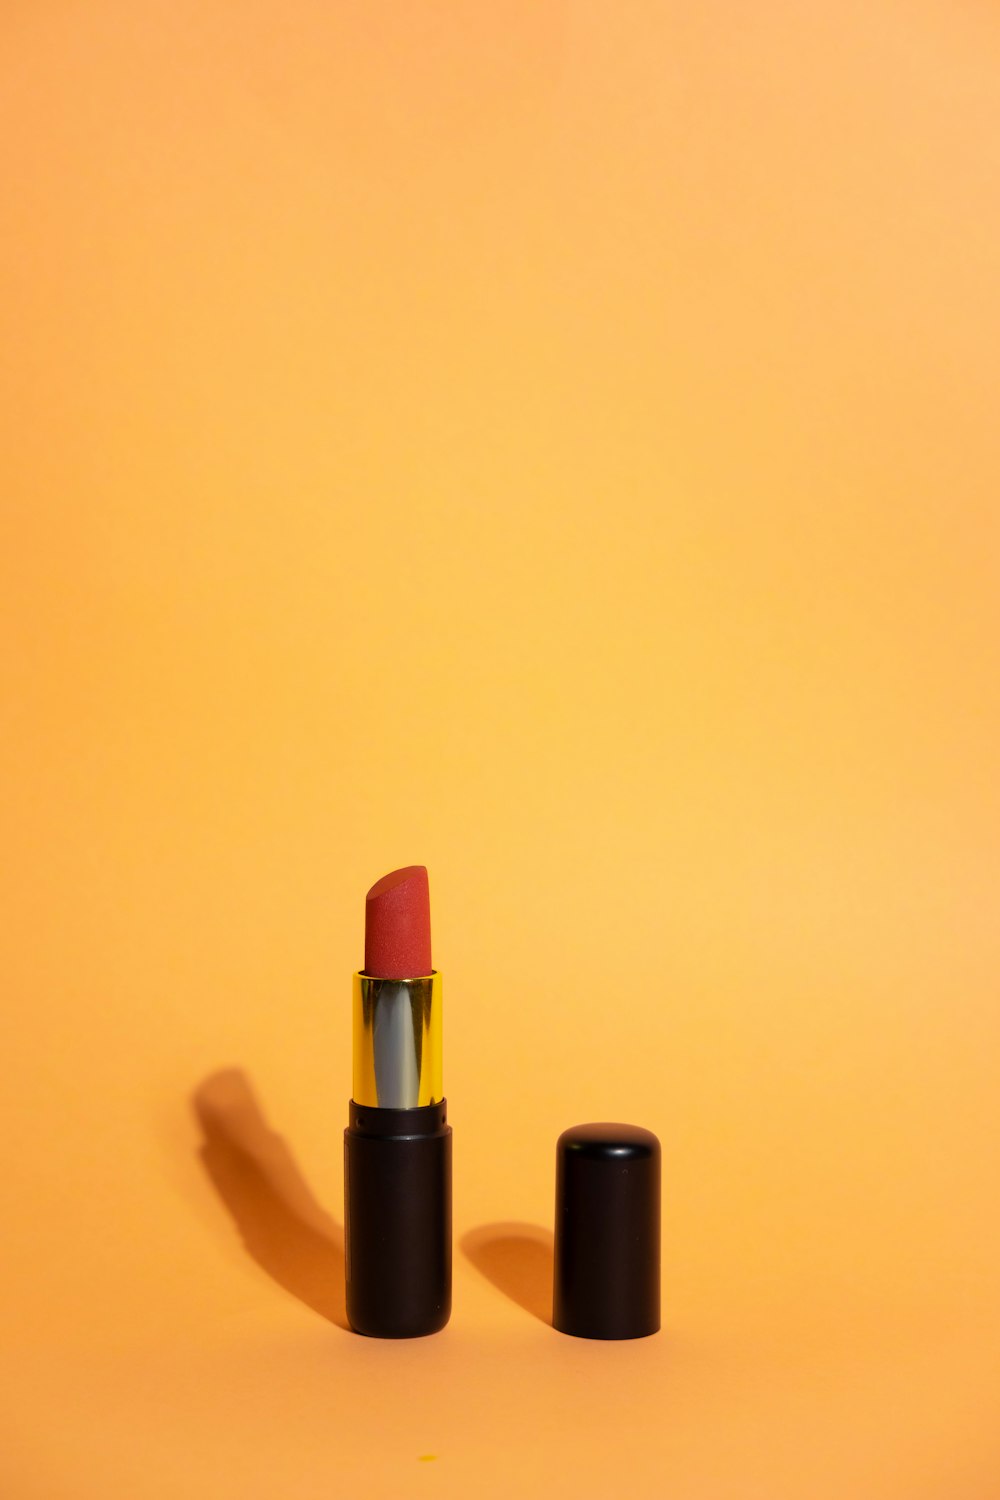 a red lipstick is sitting on a yellow background